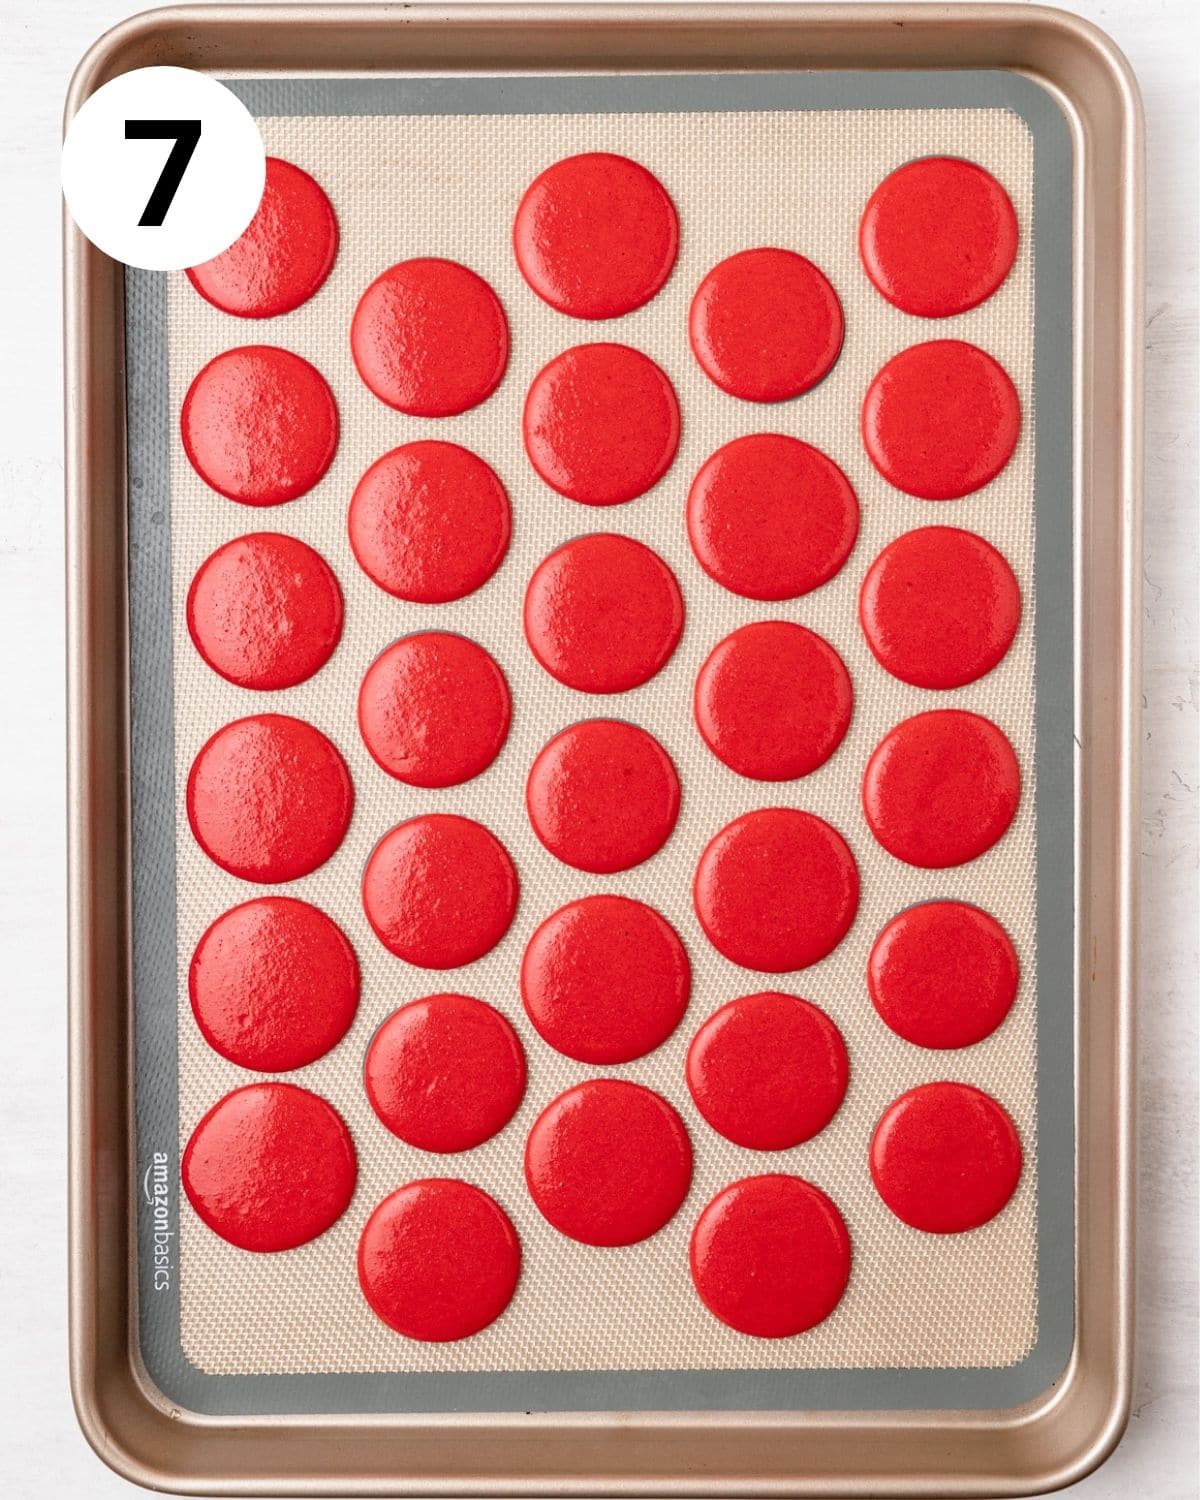 red macarons piped onto silicone mat.